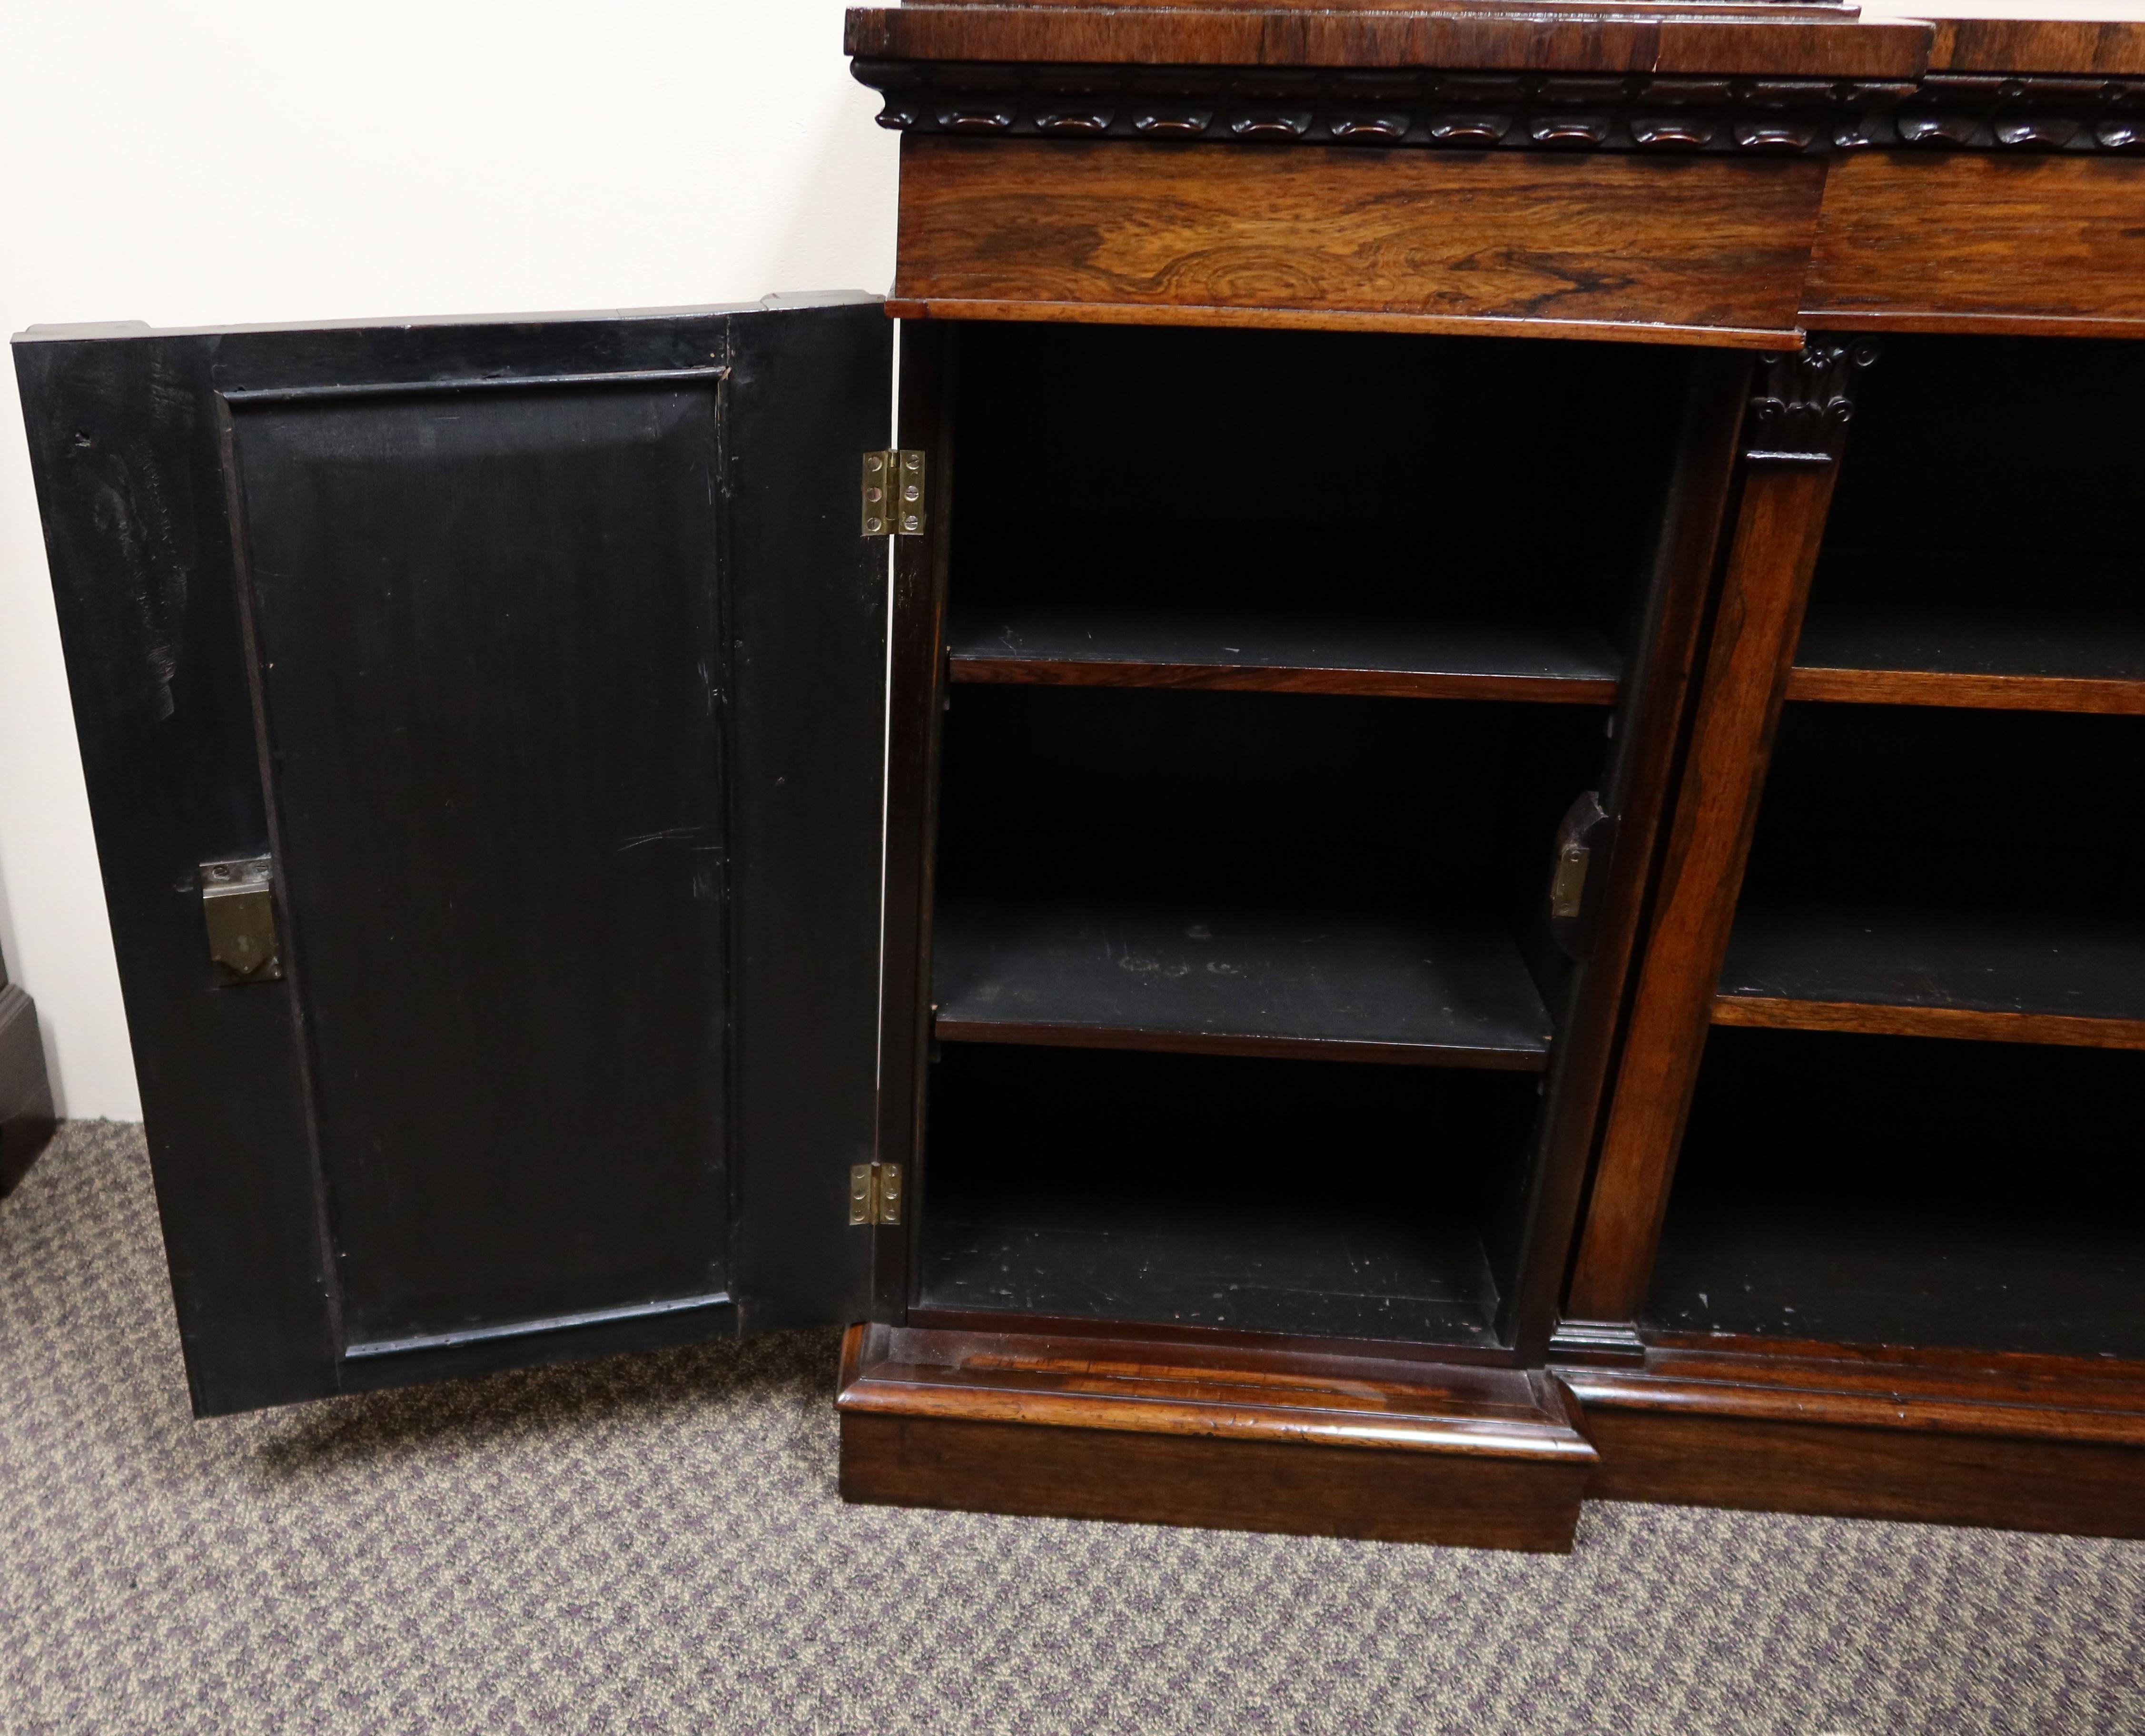 English Regency Period Low Rosewood Bookcase with Marble Tablets, circa 1810 For Sale 5